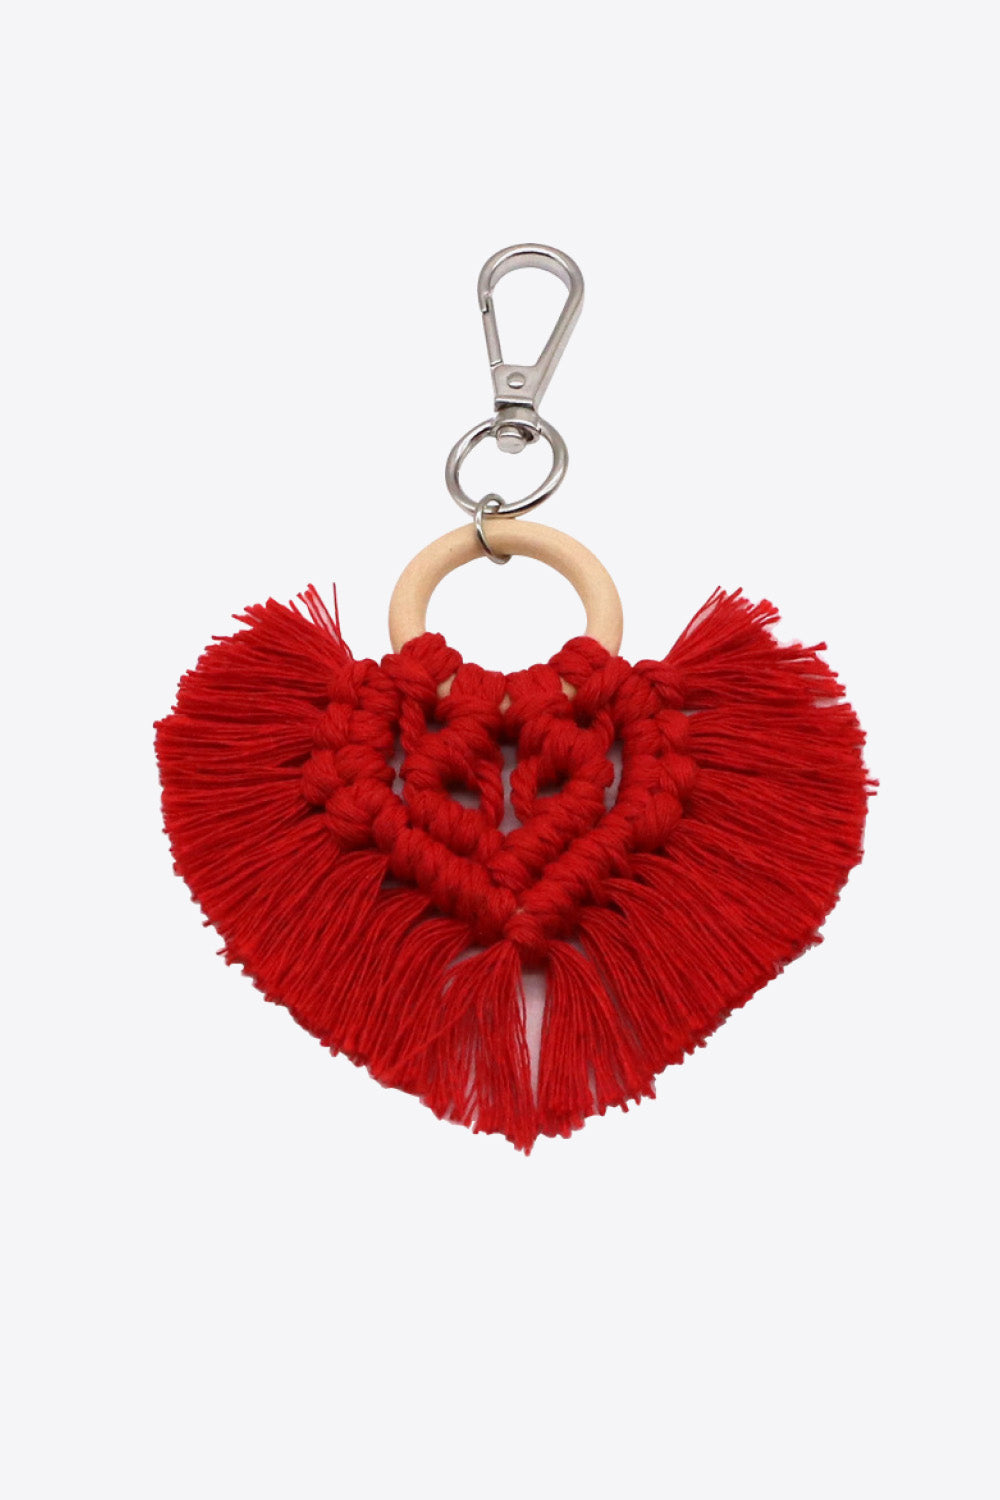 Firebrick Assorted 4-Pack Heart-Shaped Macrame Fringe Keychain Sentient Beauty Fashions Apparel & Accessories